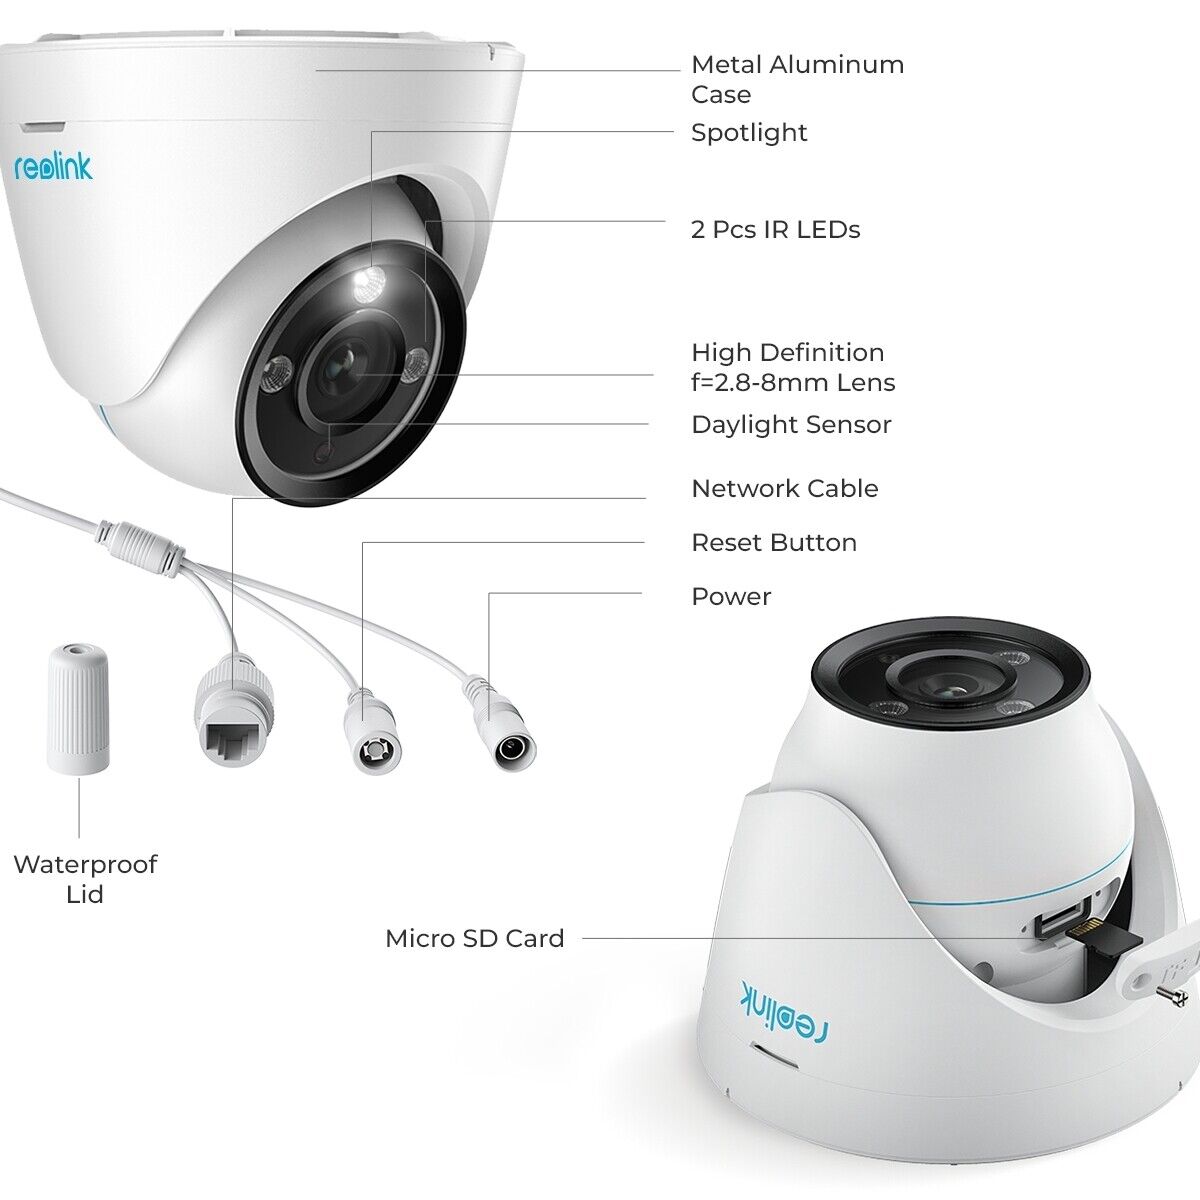 RLC-833A Video Surveillance Camera: High-Definition 4K Resolution, IP PoE System with Advanced Human/Vehicle/Pet Detection, 25FPS Daytime, 100Ft IR Night Vision, Expandable Storage up to 256GB microSD Card, Two-Way Audio, and Motion Alerts Included - Spy-shop.com